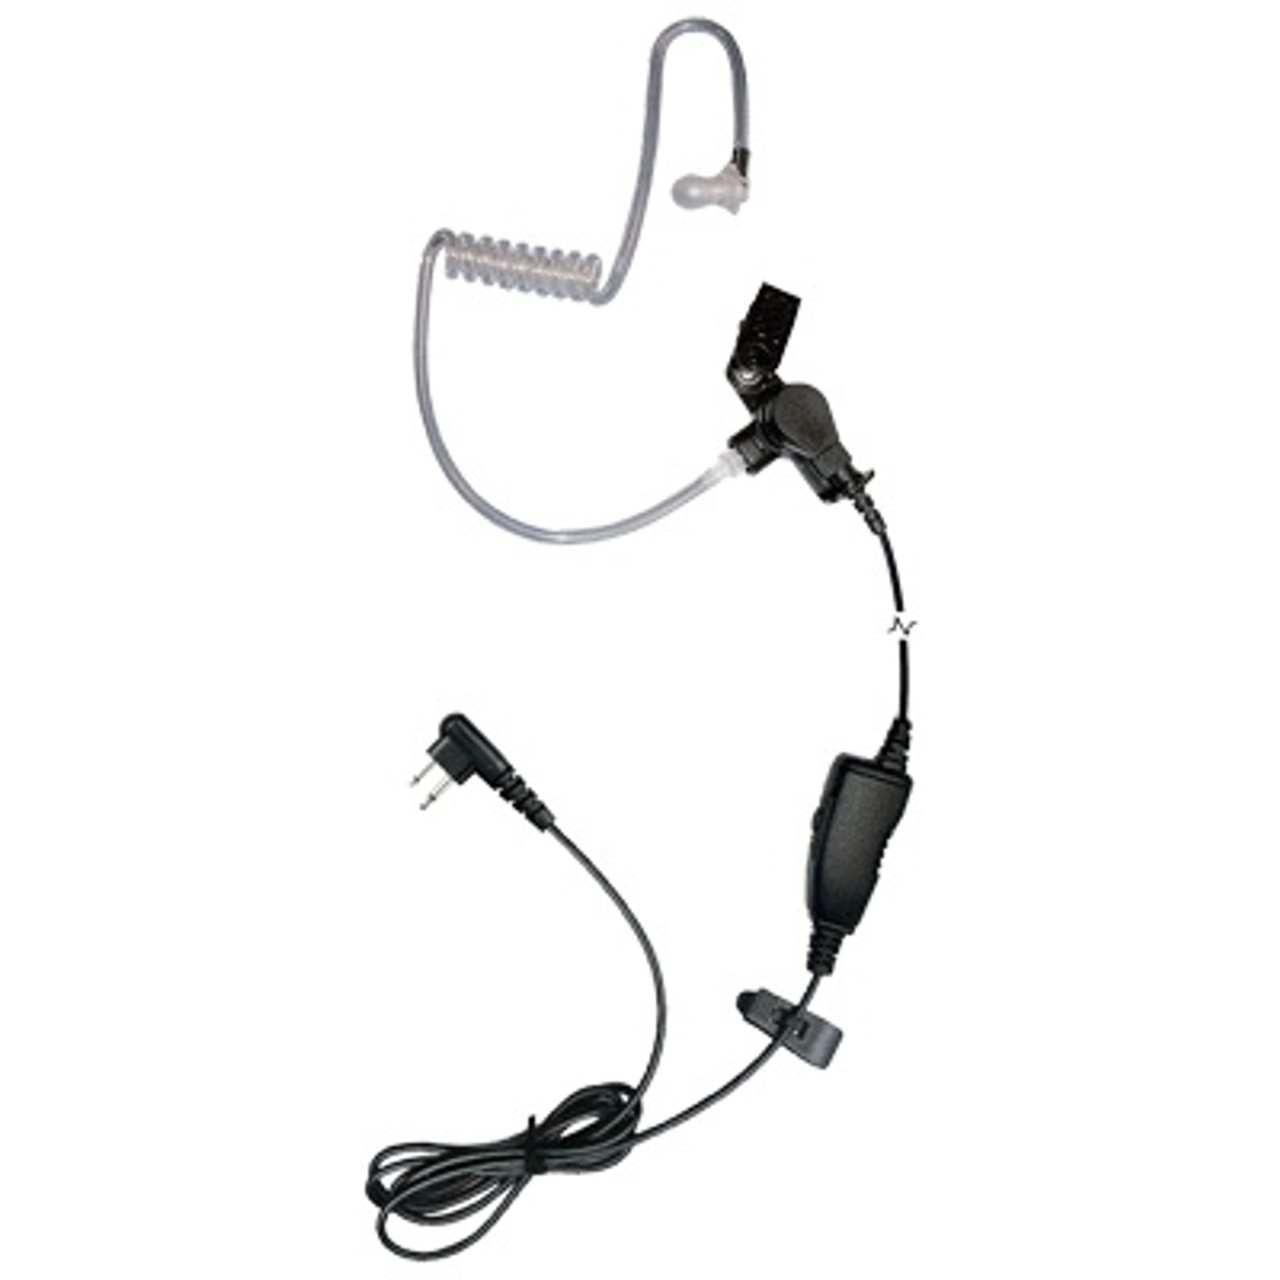 Motorola HKLN4477 Surveillance HKLN4477A Security Headset single-wire  earpiece with a combined microphone and push-to-talk offers transmit and  receive capabilities and includes a clear acoustic tube and rubber eartip  for comfort in extended